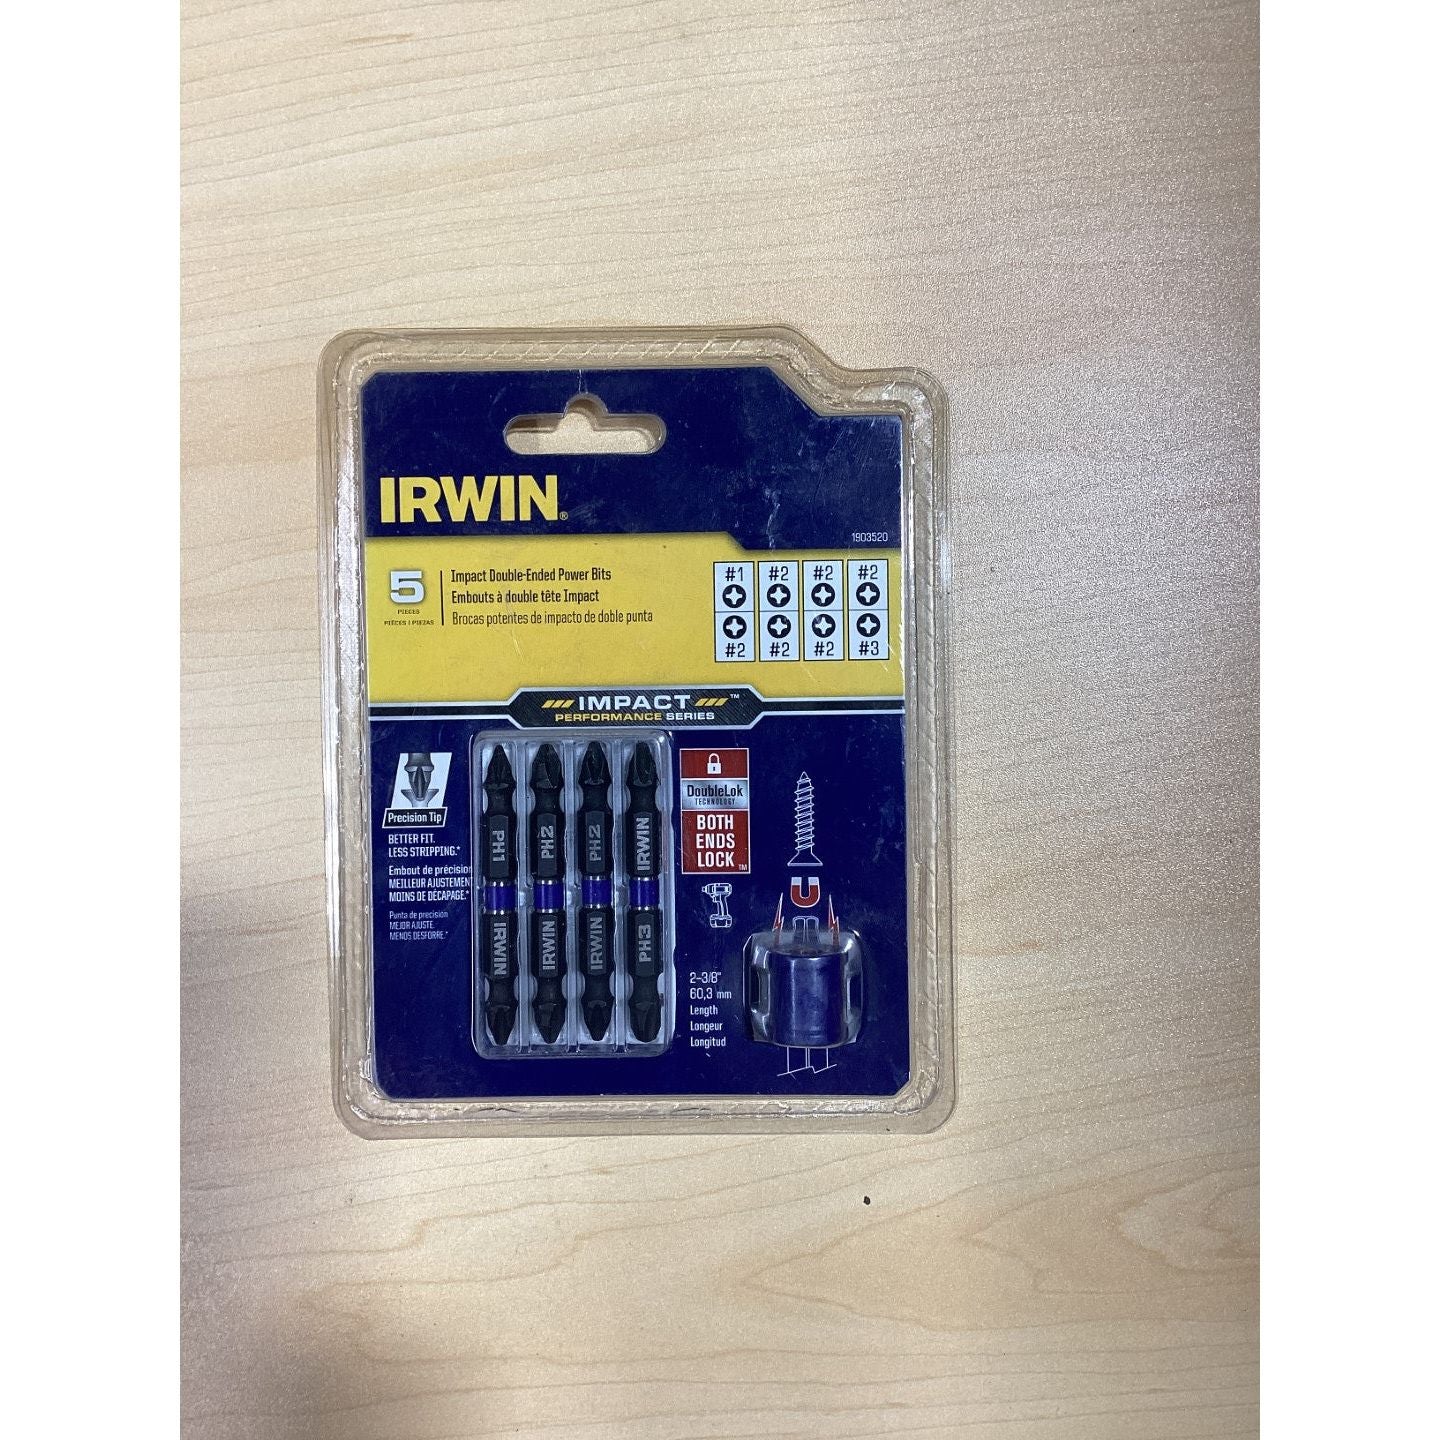 Irwin 5 piece Impact Double-Ended Power Bits screwdriver set